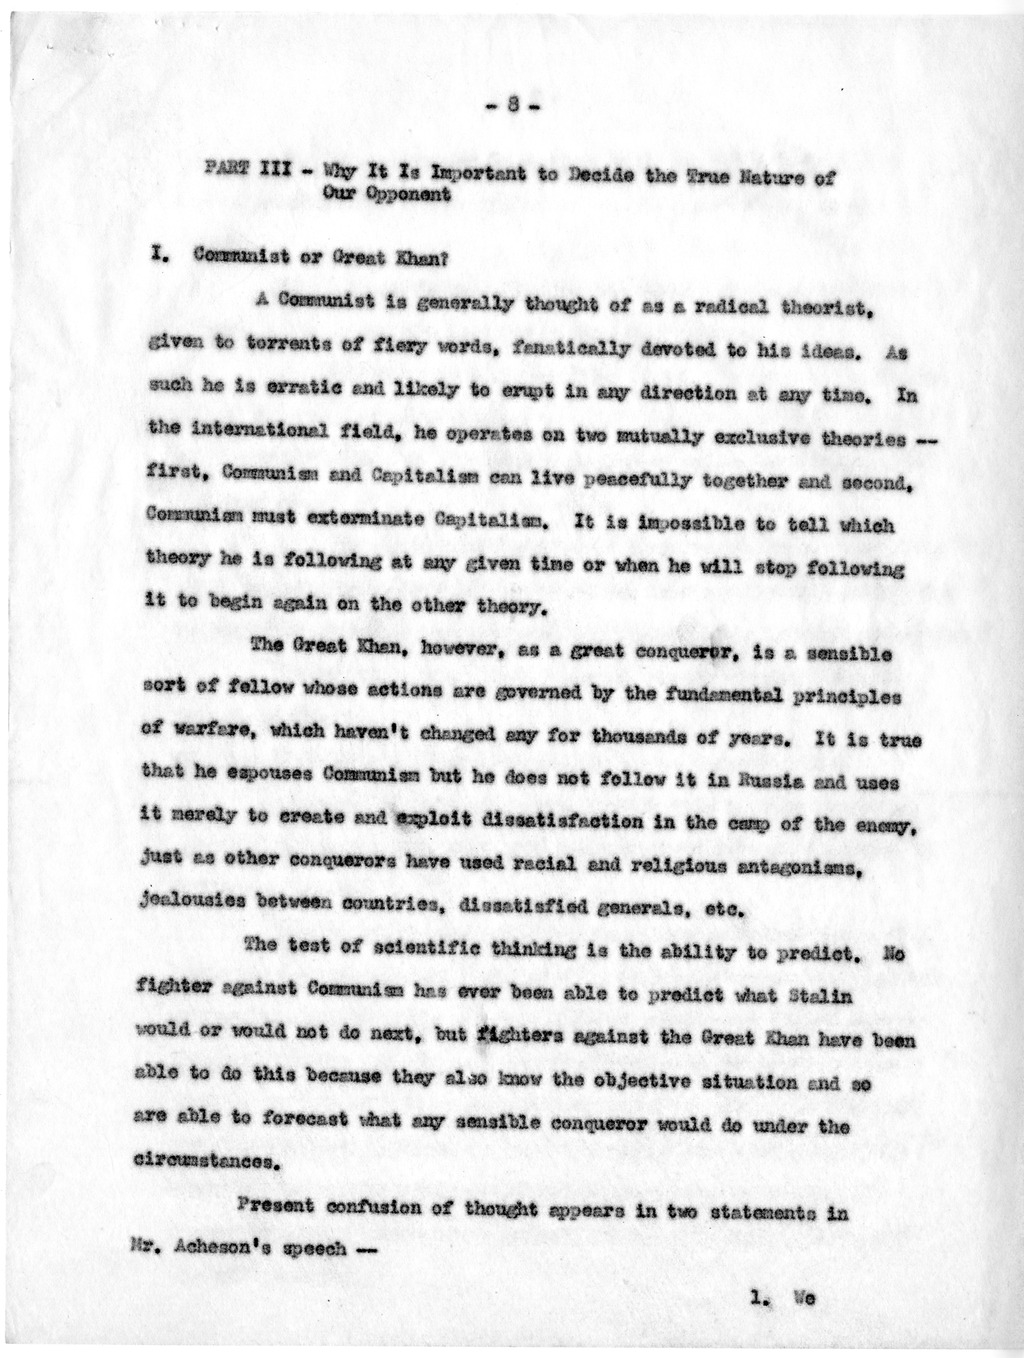 Memorandum from Paul G. Hoffman to Robert N. Golding with Attached Draft of Report, The "Cold War" - What it is and What Must Be Done to Win it Without Fighting